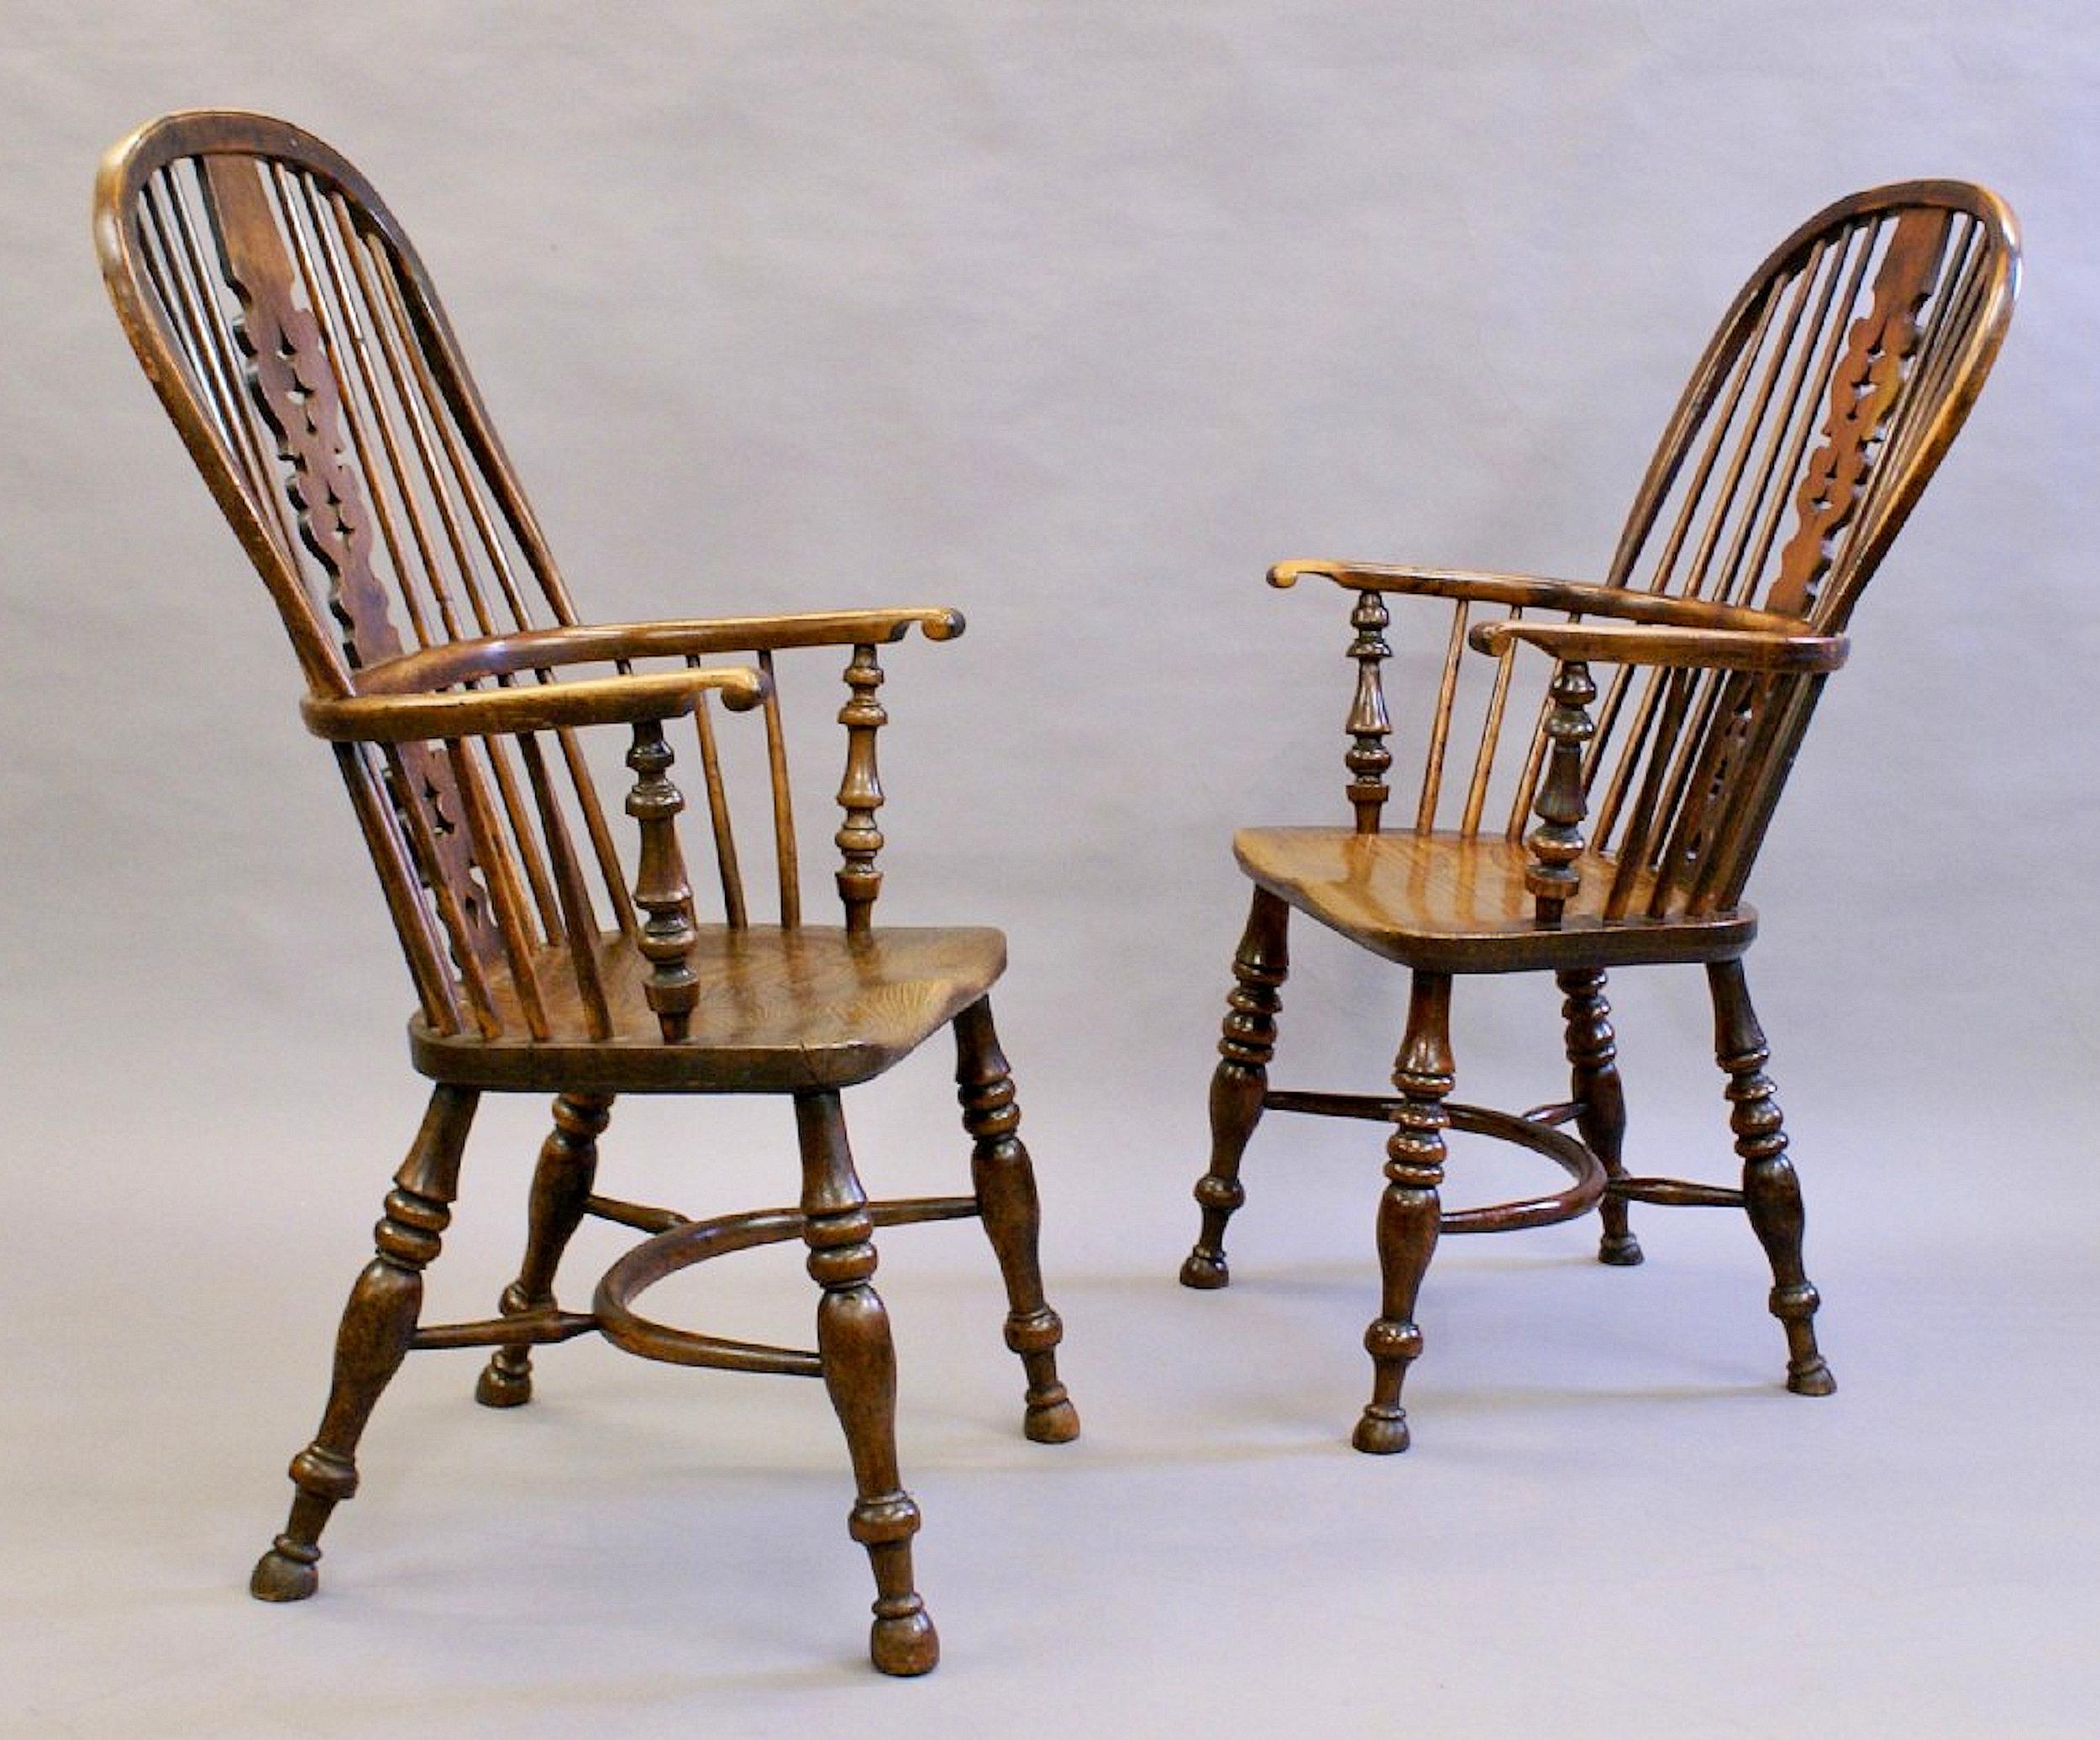 These beautifully simple yet gracefully shaped matched pair of Yew wood arm chairs feature hooped backs and arm rails with central pierced ornate back splats. The saddled seats are supported on 4 turned legs joined by a curved central stretcher bar.